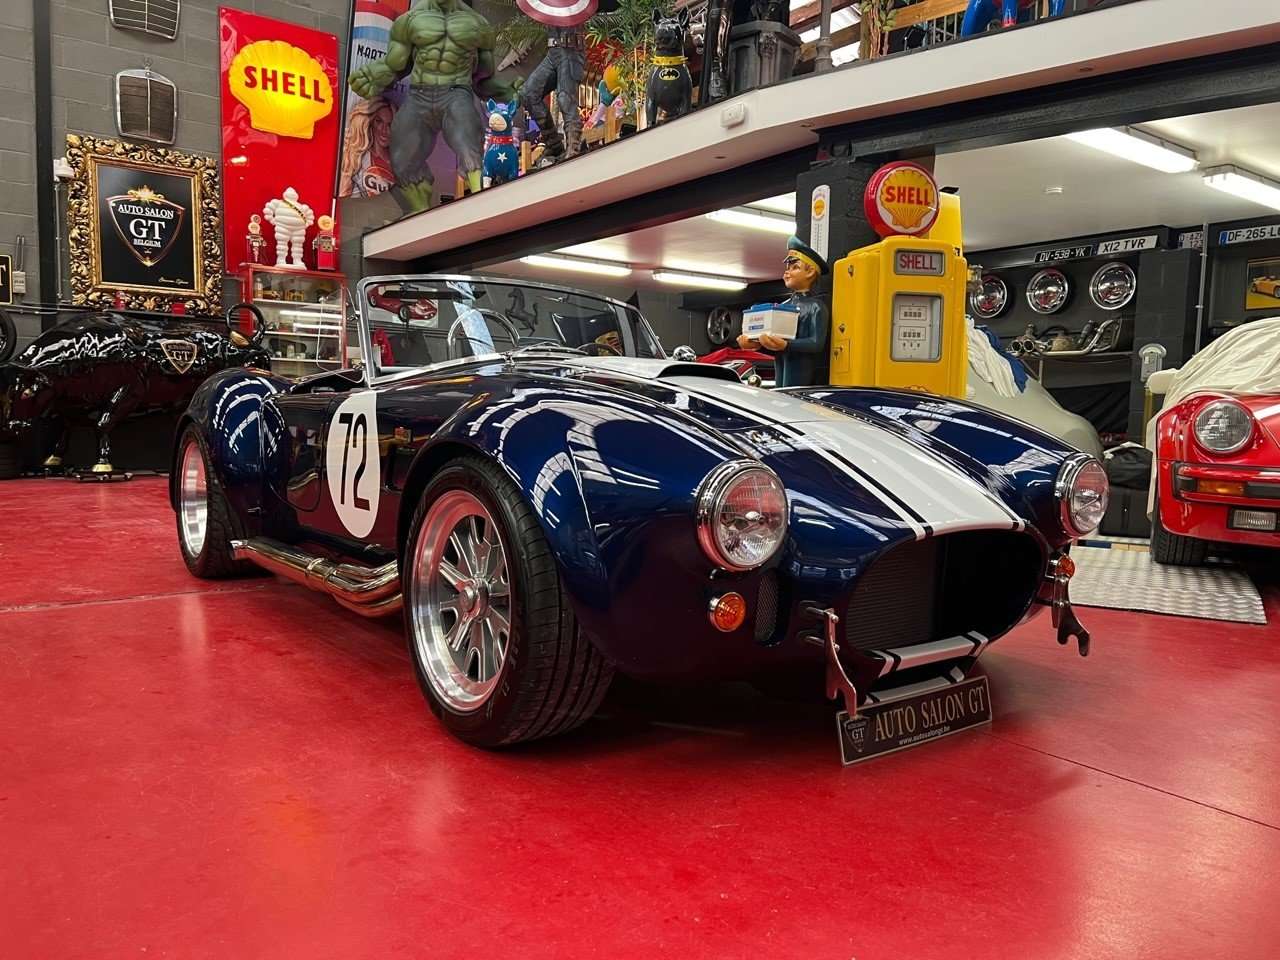 AC Cobra Convertible in Blue used in Barchon for € 129,990.-